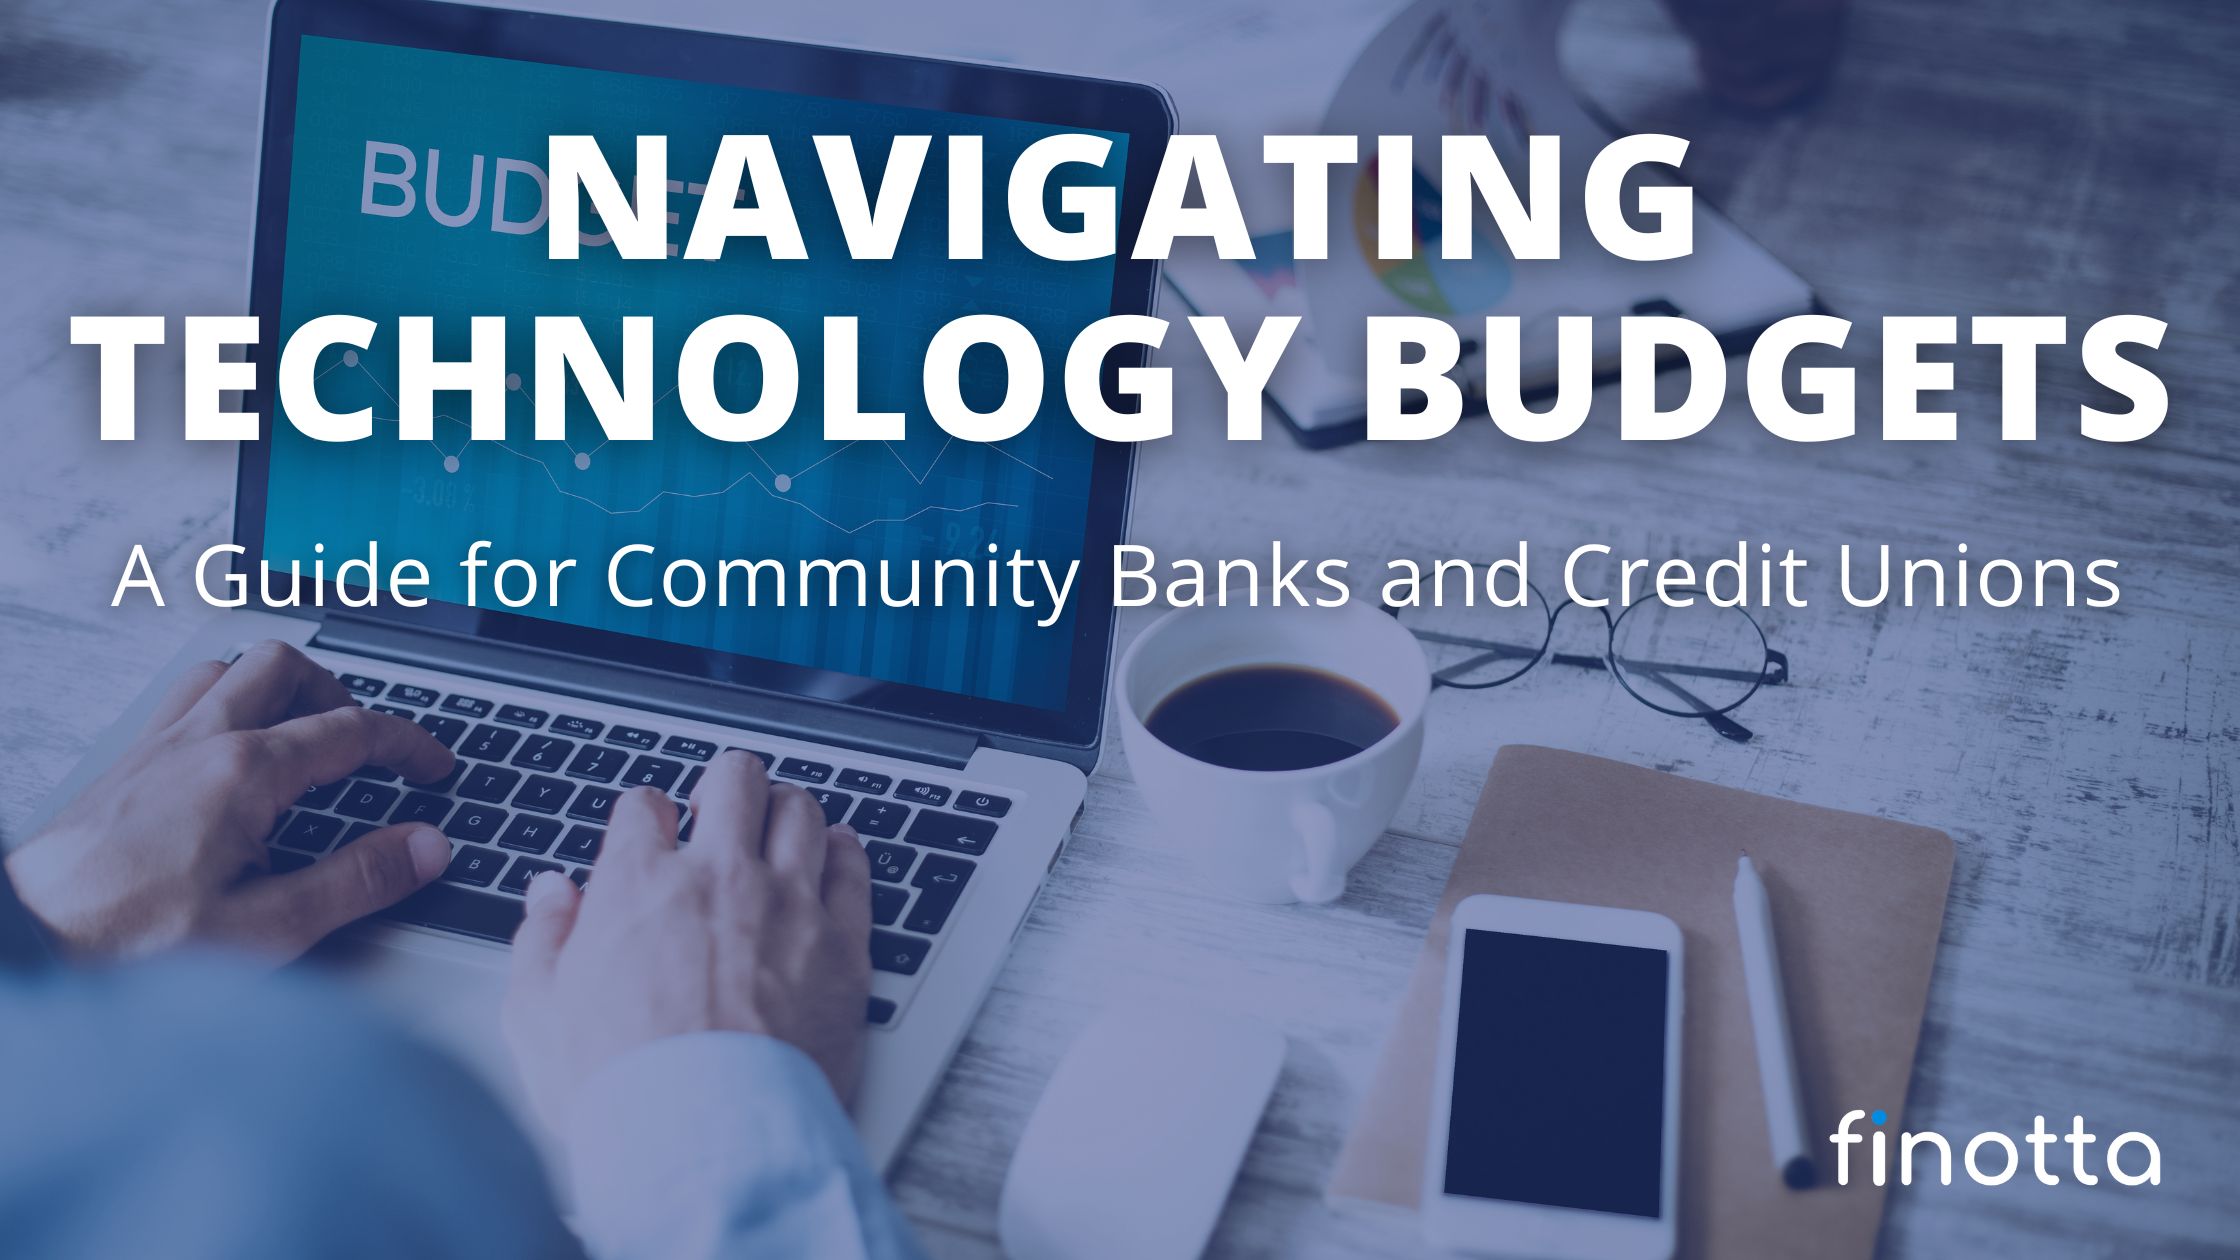 Navigating Technology Budgets: A Guide for Community Banks and Credit Unions